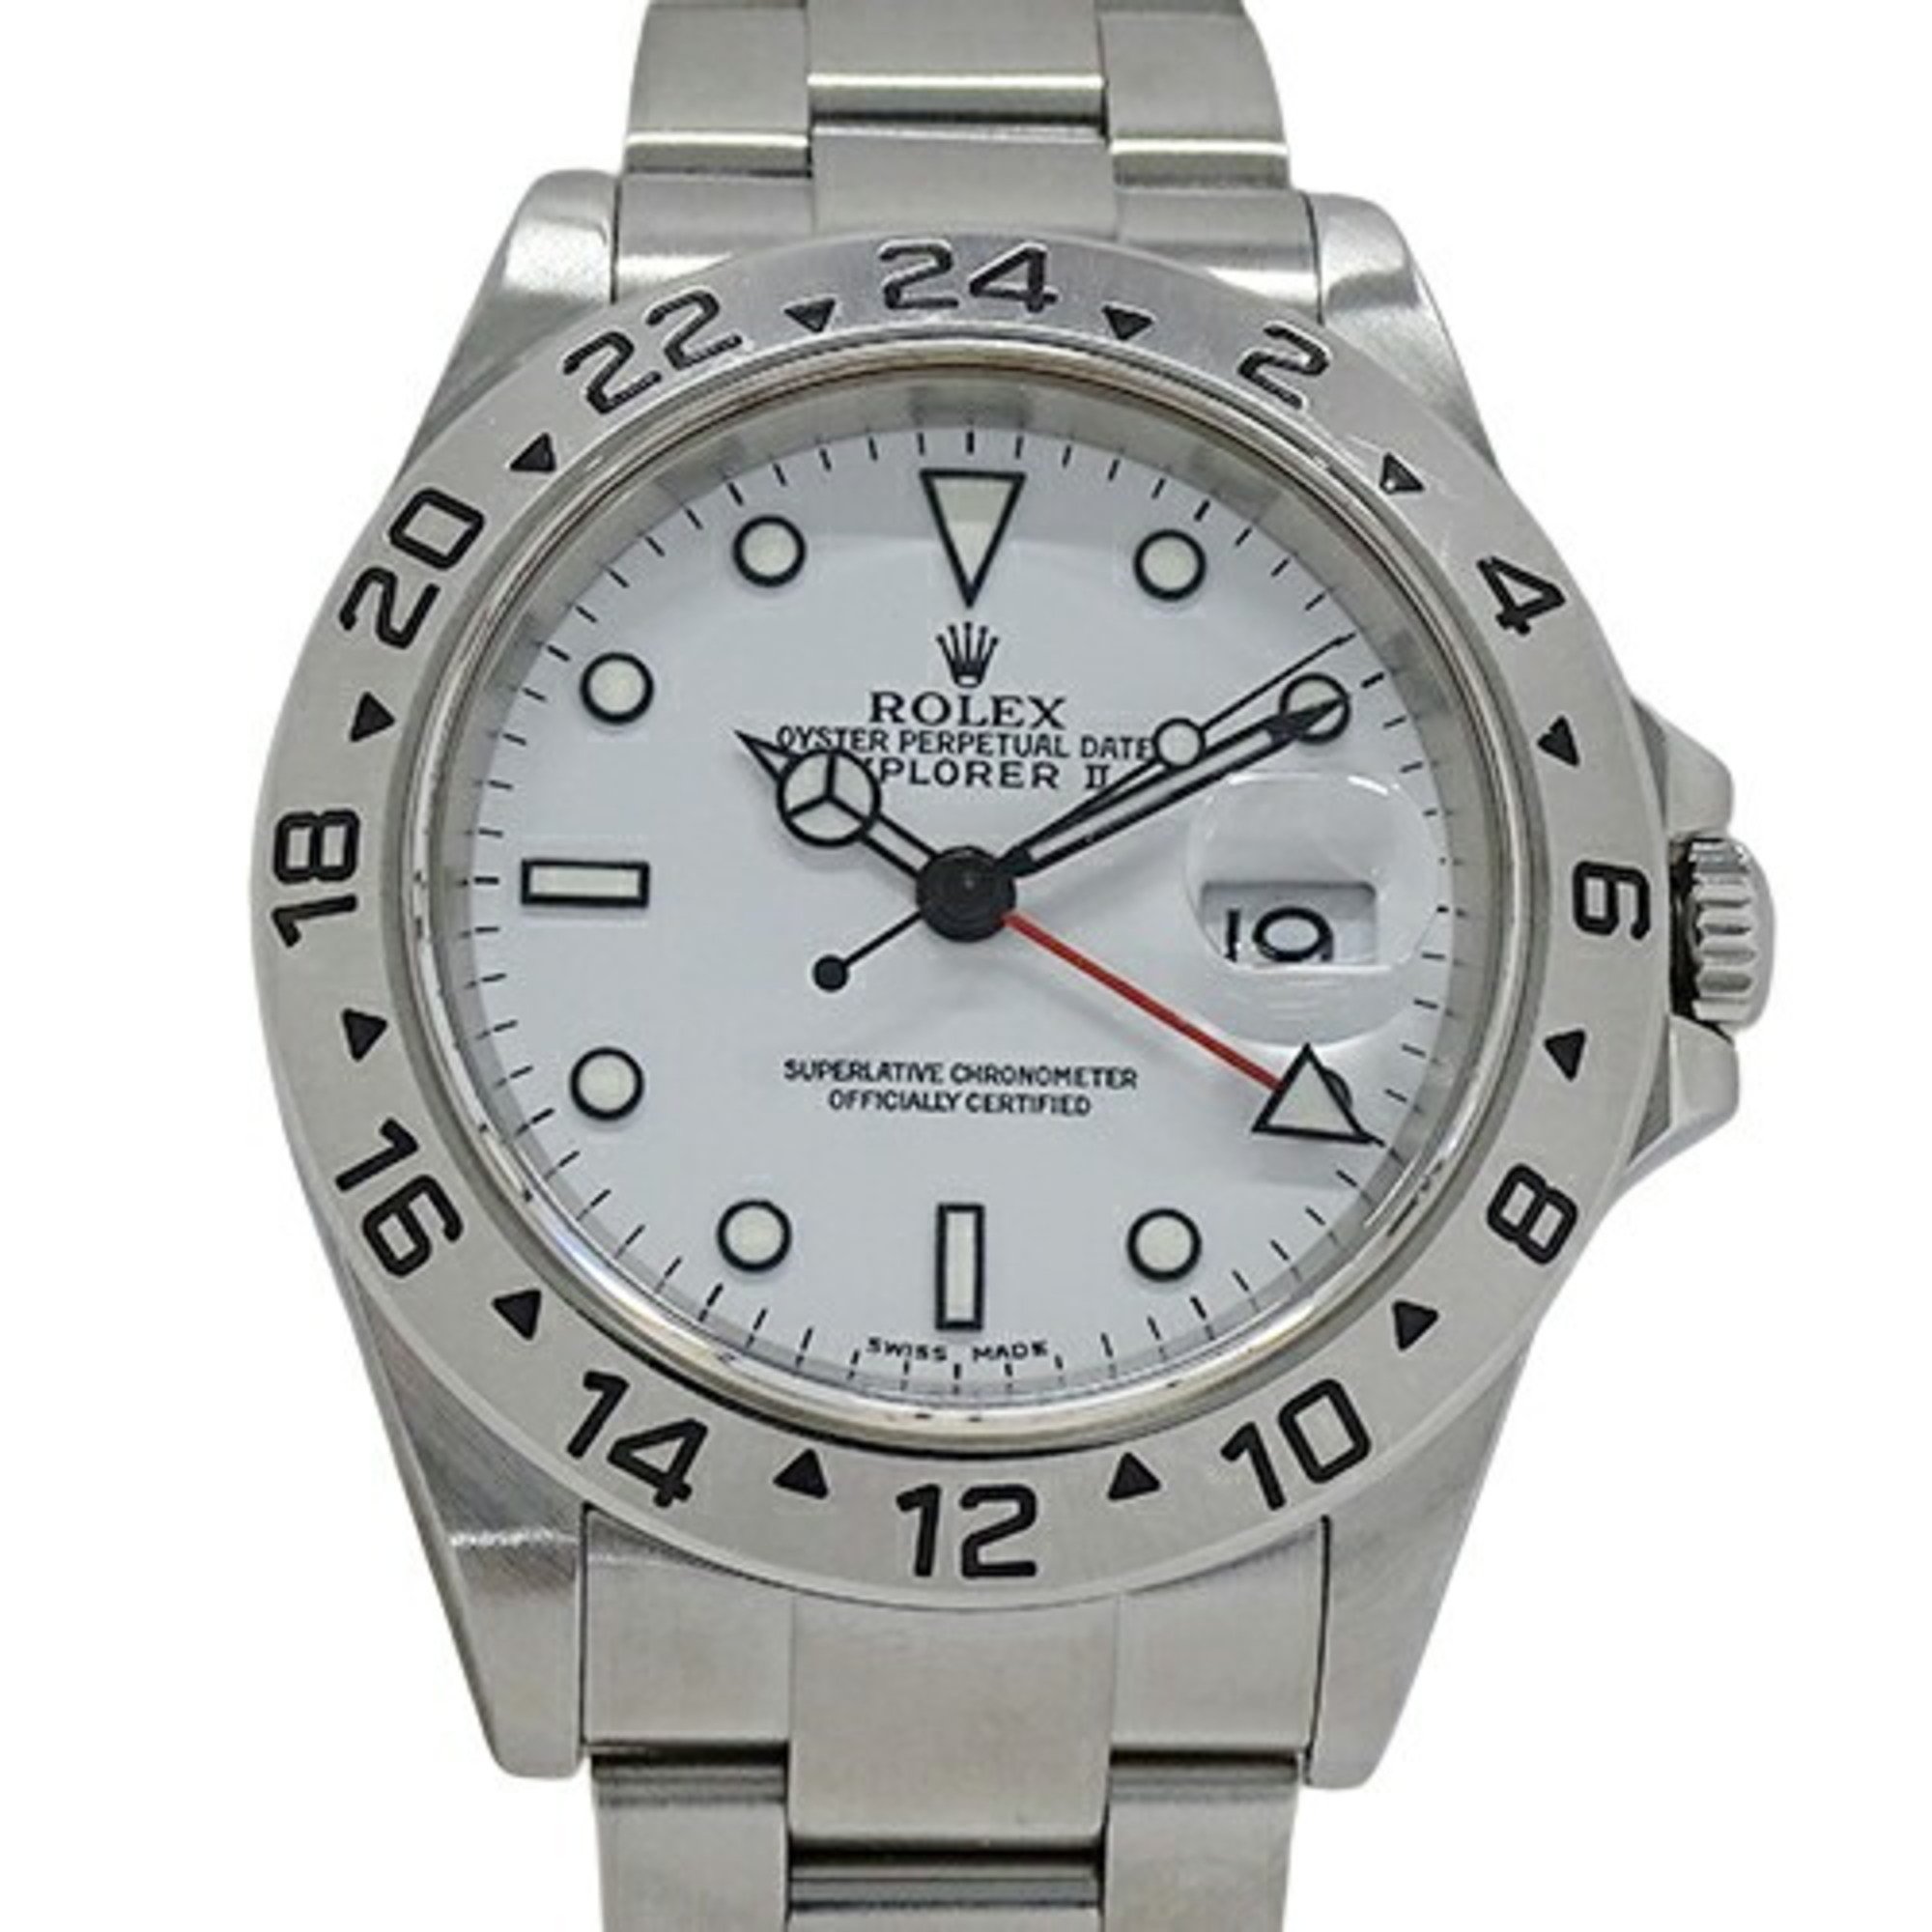 Rolex ROLEX Explorer II 16570 F serial number Men's watch Date Automatic AT Stainless steel SS Silver White Polished